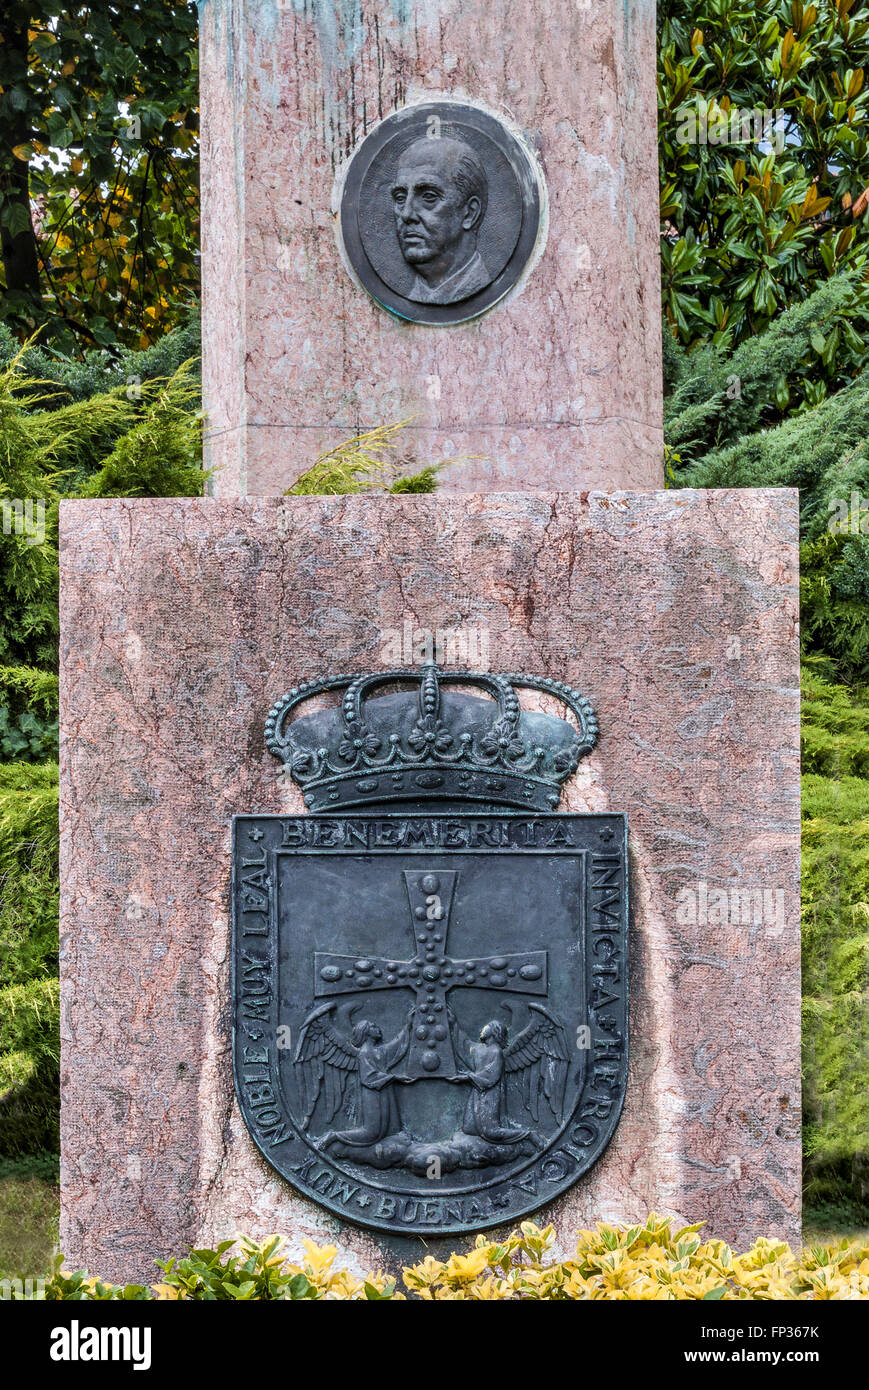 Monument to dictator Francisco Franco from 1975, detail, portrait of Franco was removed in 2015, in front the crest of the Stock Photo